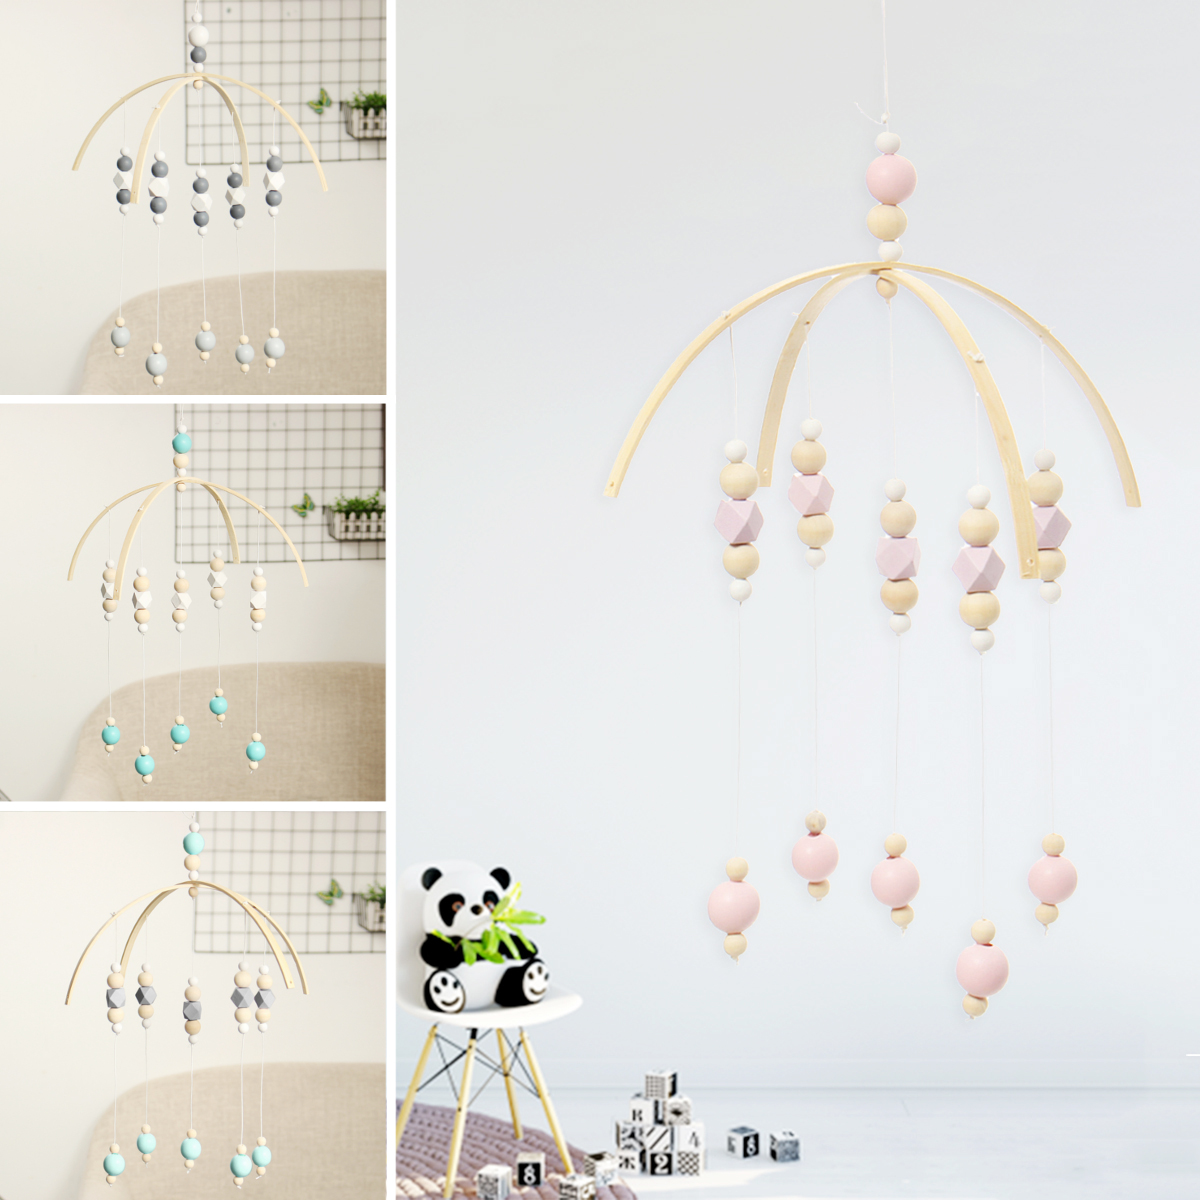 Wooden-Beads-Wind-Chimes-with-Wool-Balls-Baby-Bed-Hanging-Windbell-Crib-Tent-Kids-Room-Decorations-O-1906546-1